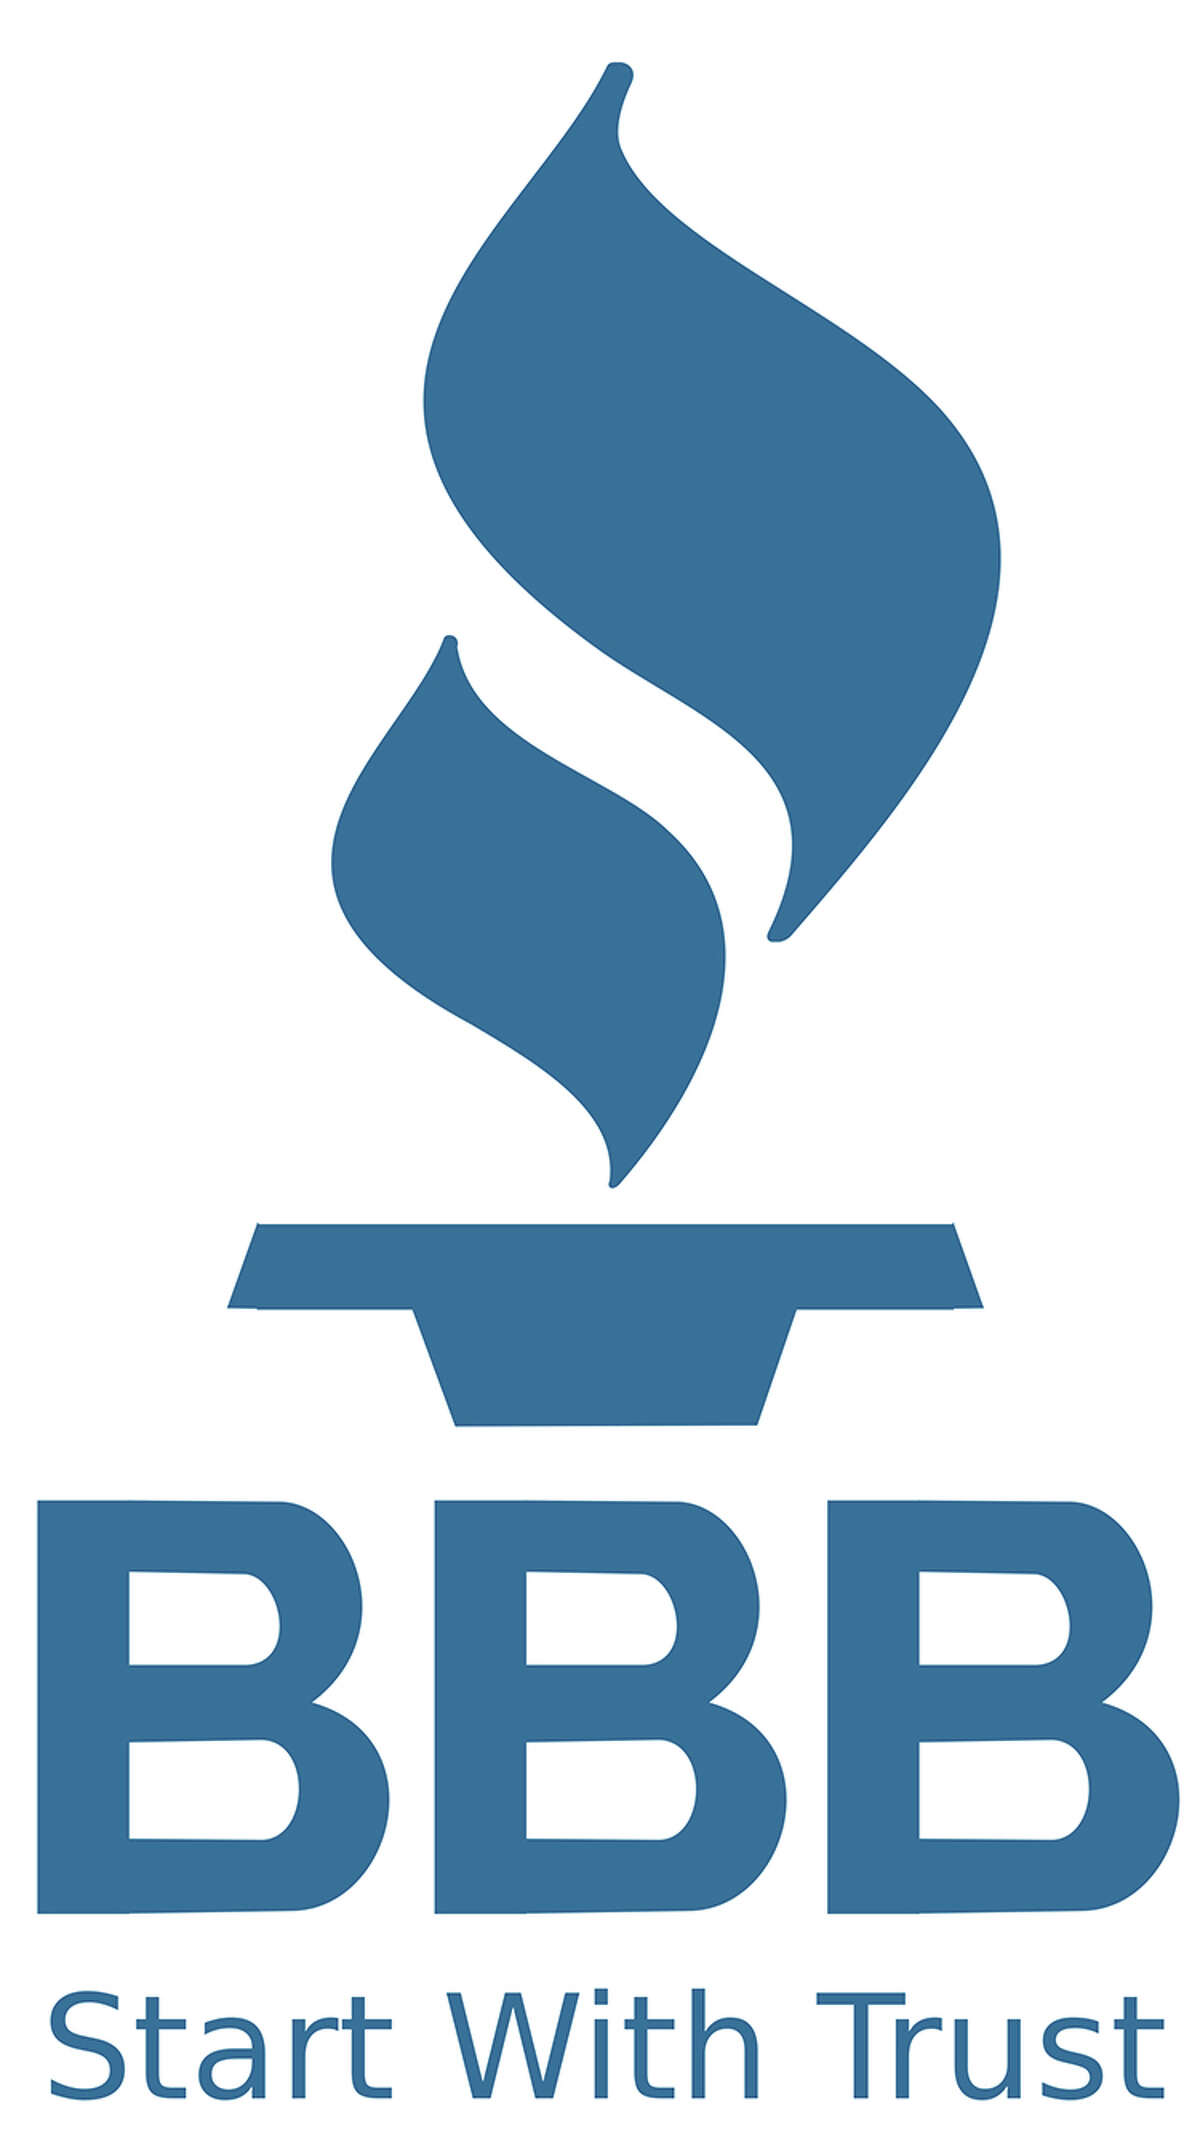 The Better Business Bureau Serving Western Michigan is advising caution when donating to Ukraine.